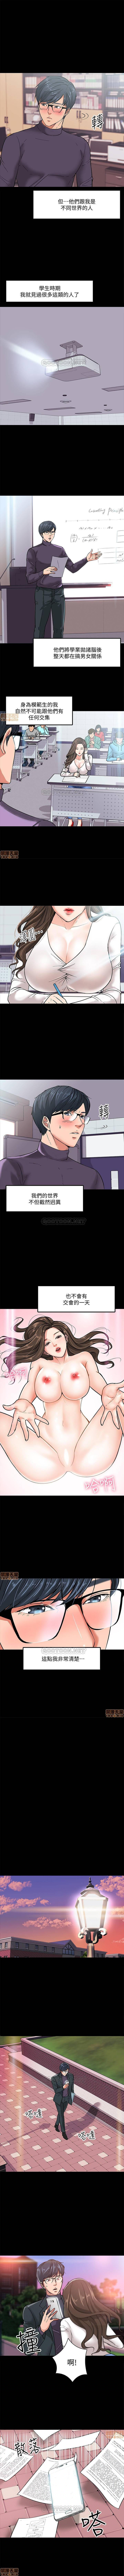 Free Fucking PROFESSOR, ARE YOU JUST GOING TO LOOK AT ME? | DESIRE SWAMP | 教授，你還等什麼? Ch. 2 [Chinese] Manhwa Sloppy Blow Job - Page 6